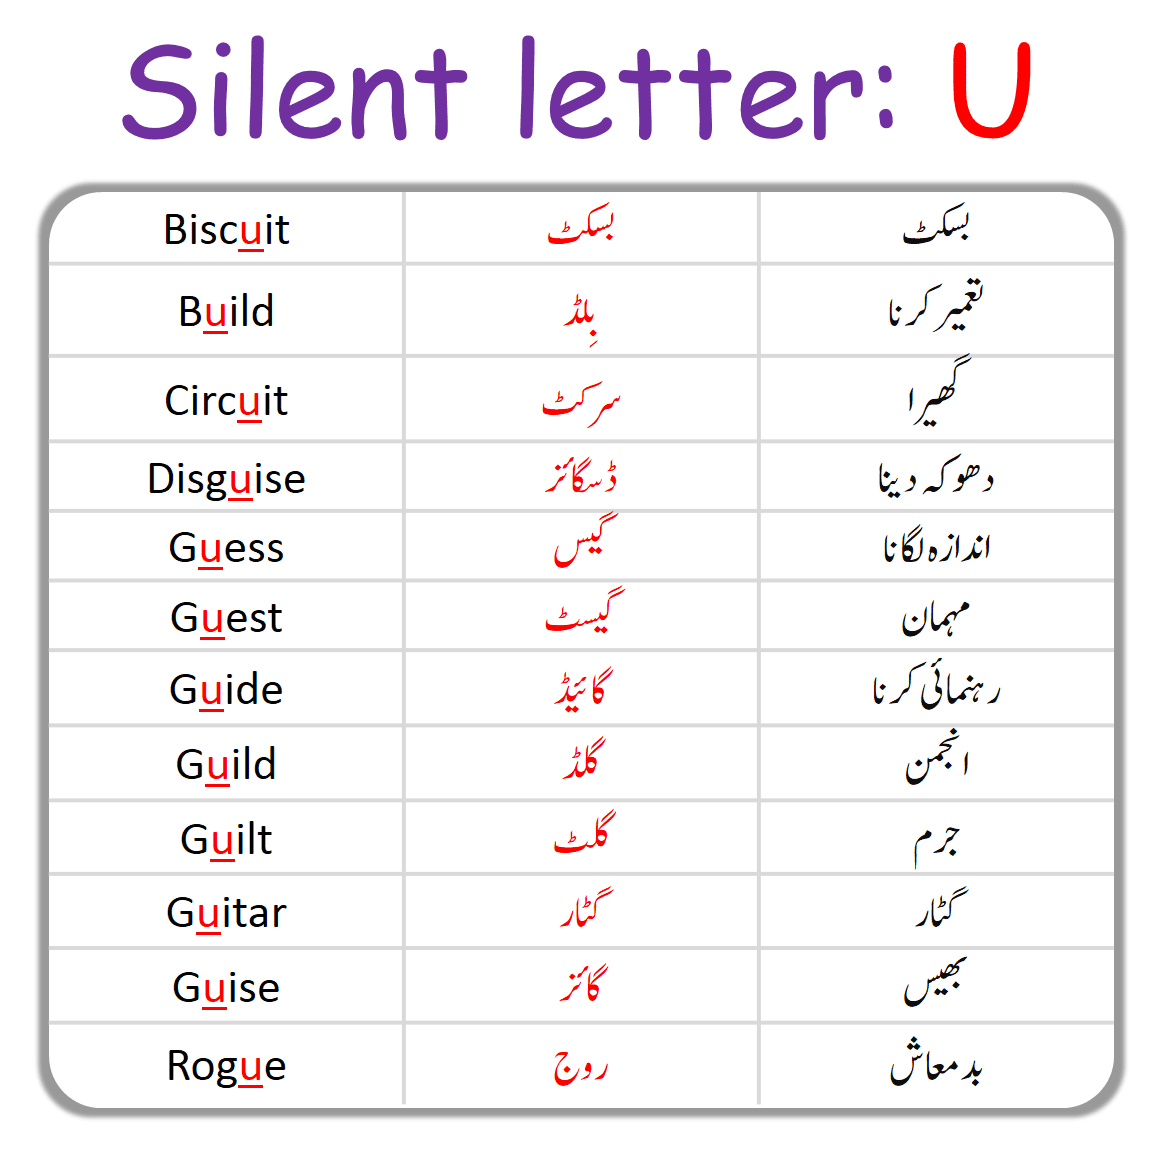 U Silent Letter in English with Urdu Examples